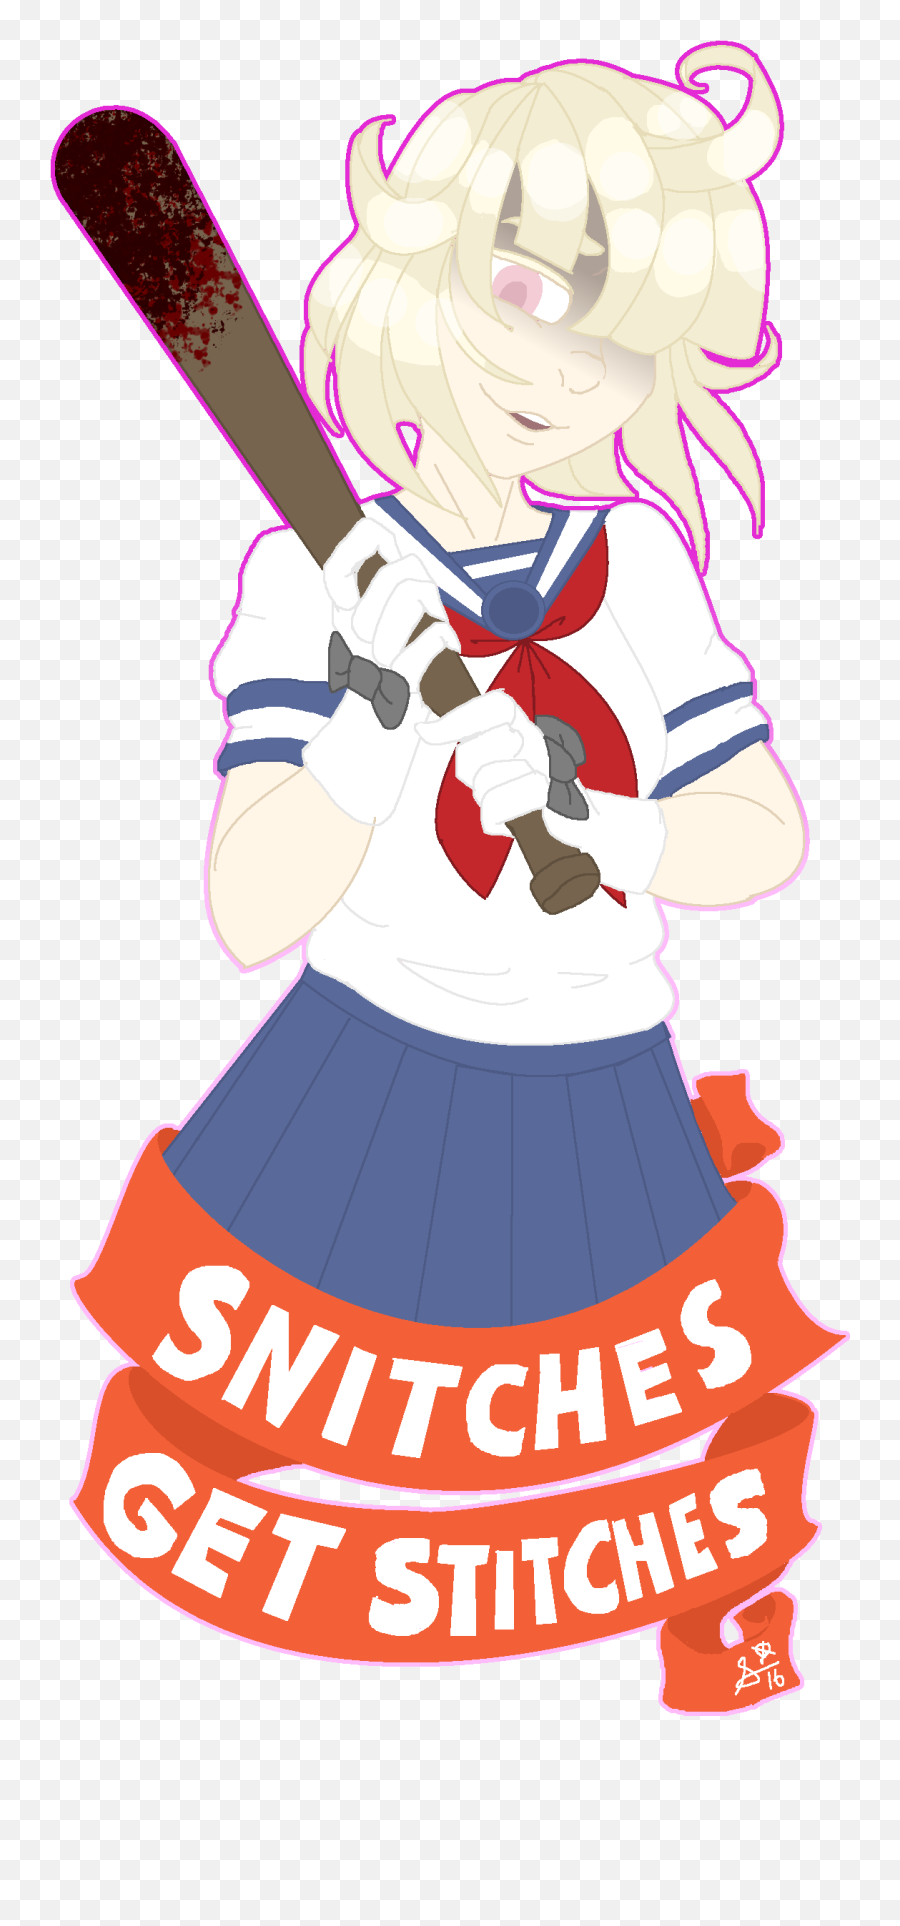 Snitches Get Stitches - Yandere Simulator Full Size Png Cartoon,Stitches Png